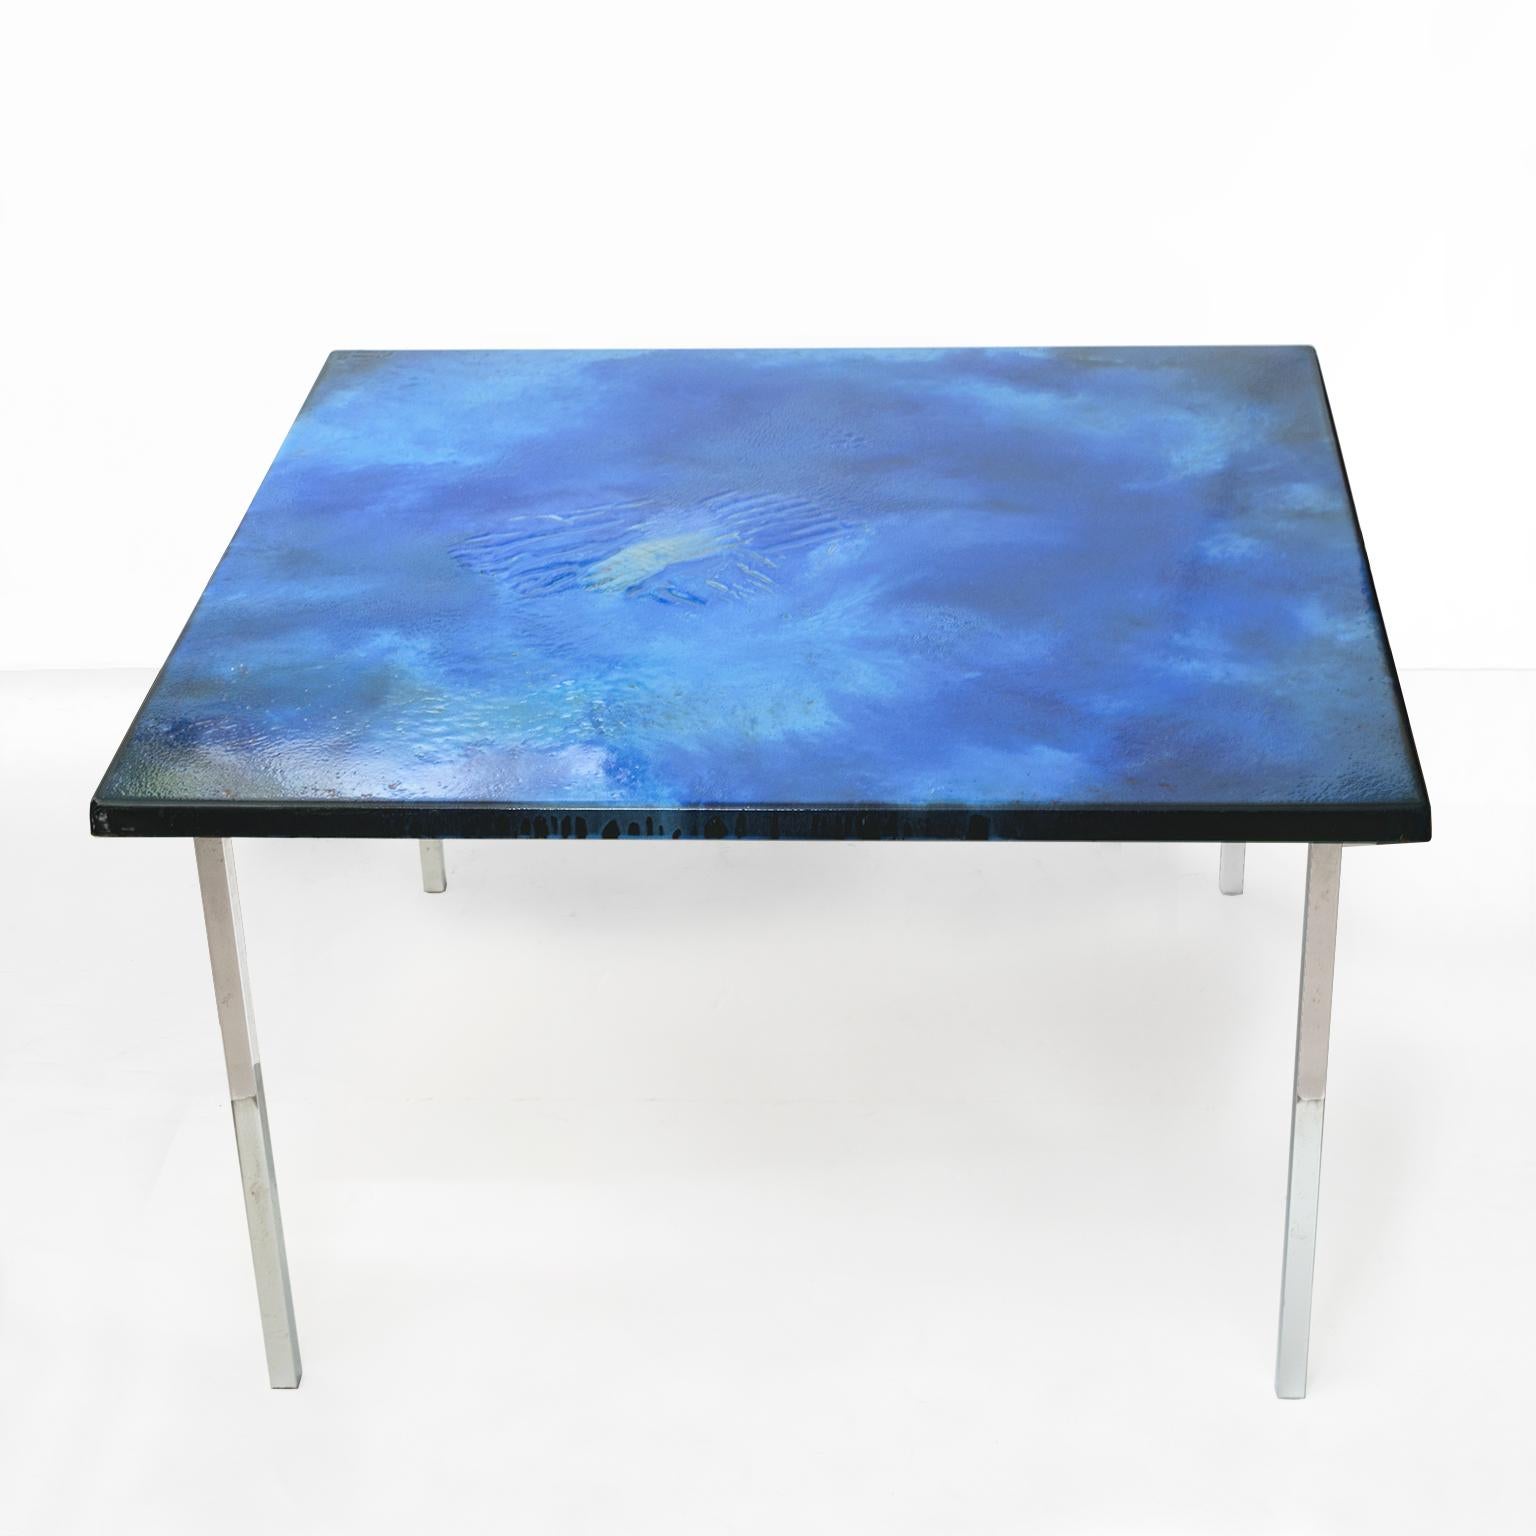 A vibrant blue enamel on copper Scandinavian Modern coffee table with chromed steel legs. The table was designed by Algot Törneman and produced for NK (Nordiska Kompaniet) in Nykoping, Sweden. Light wear to legs.

Signed by the artist and numbered